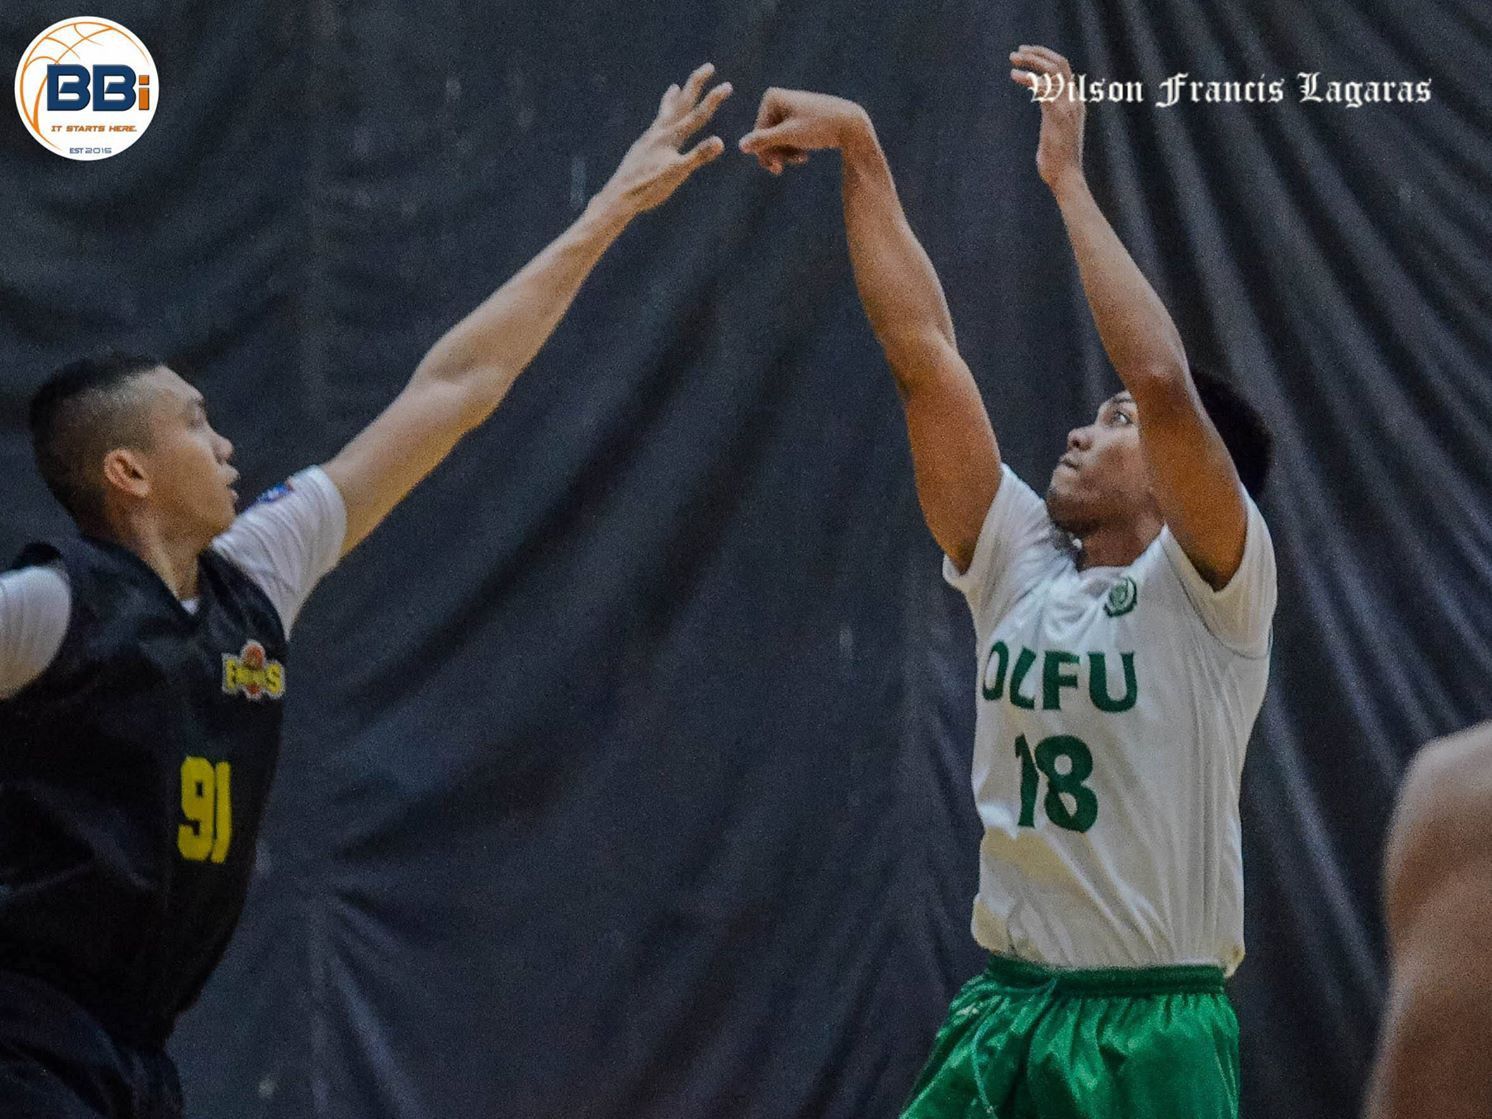 OLFU survives late TIP rally in BBI hoops